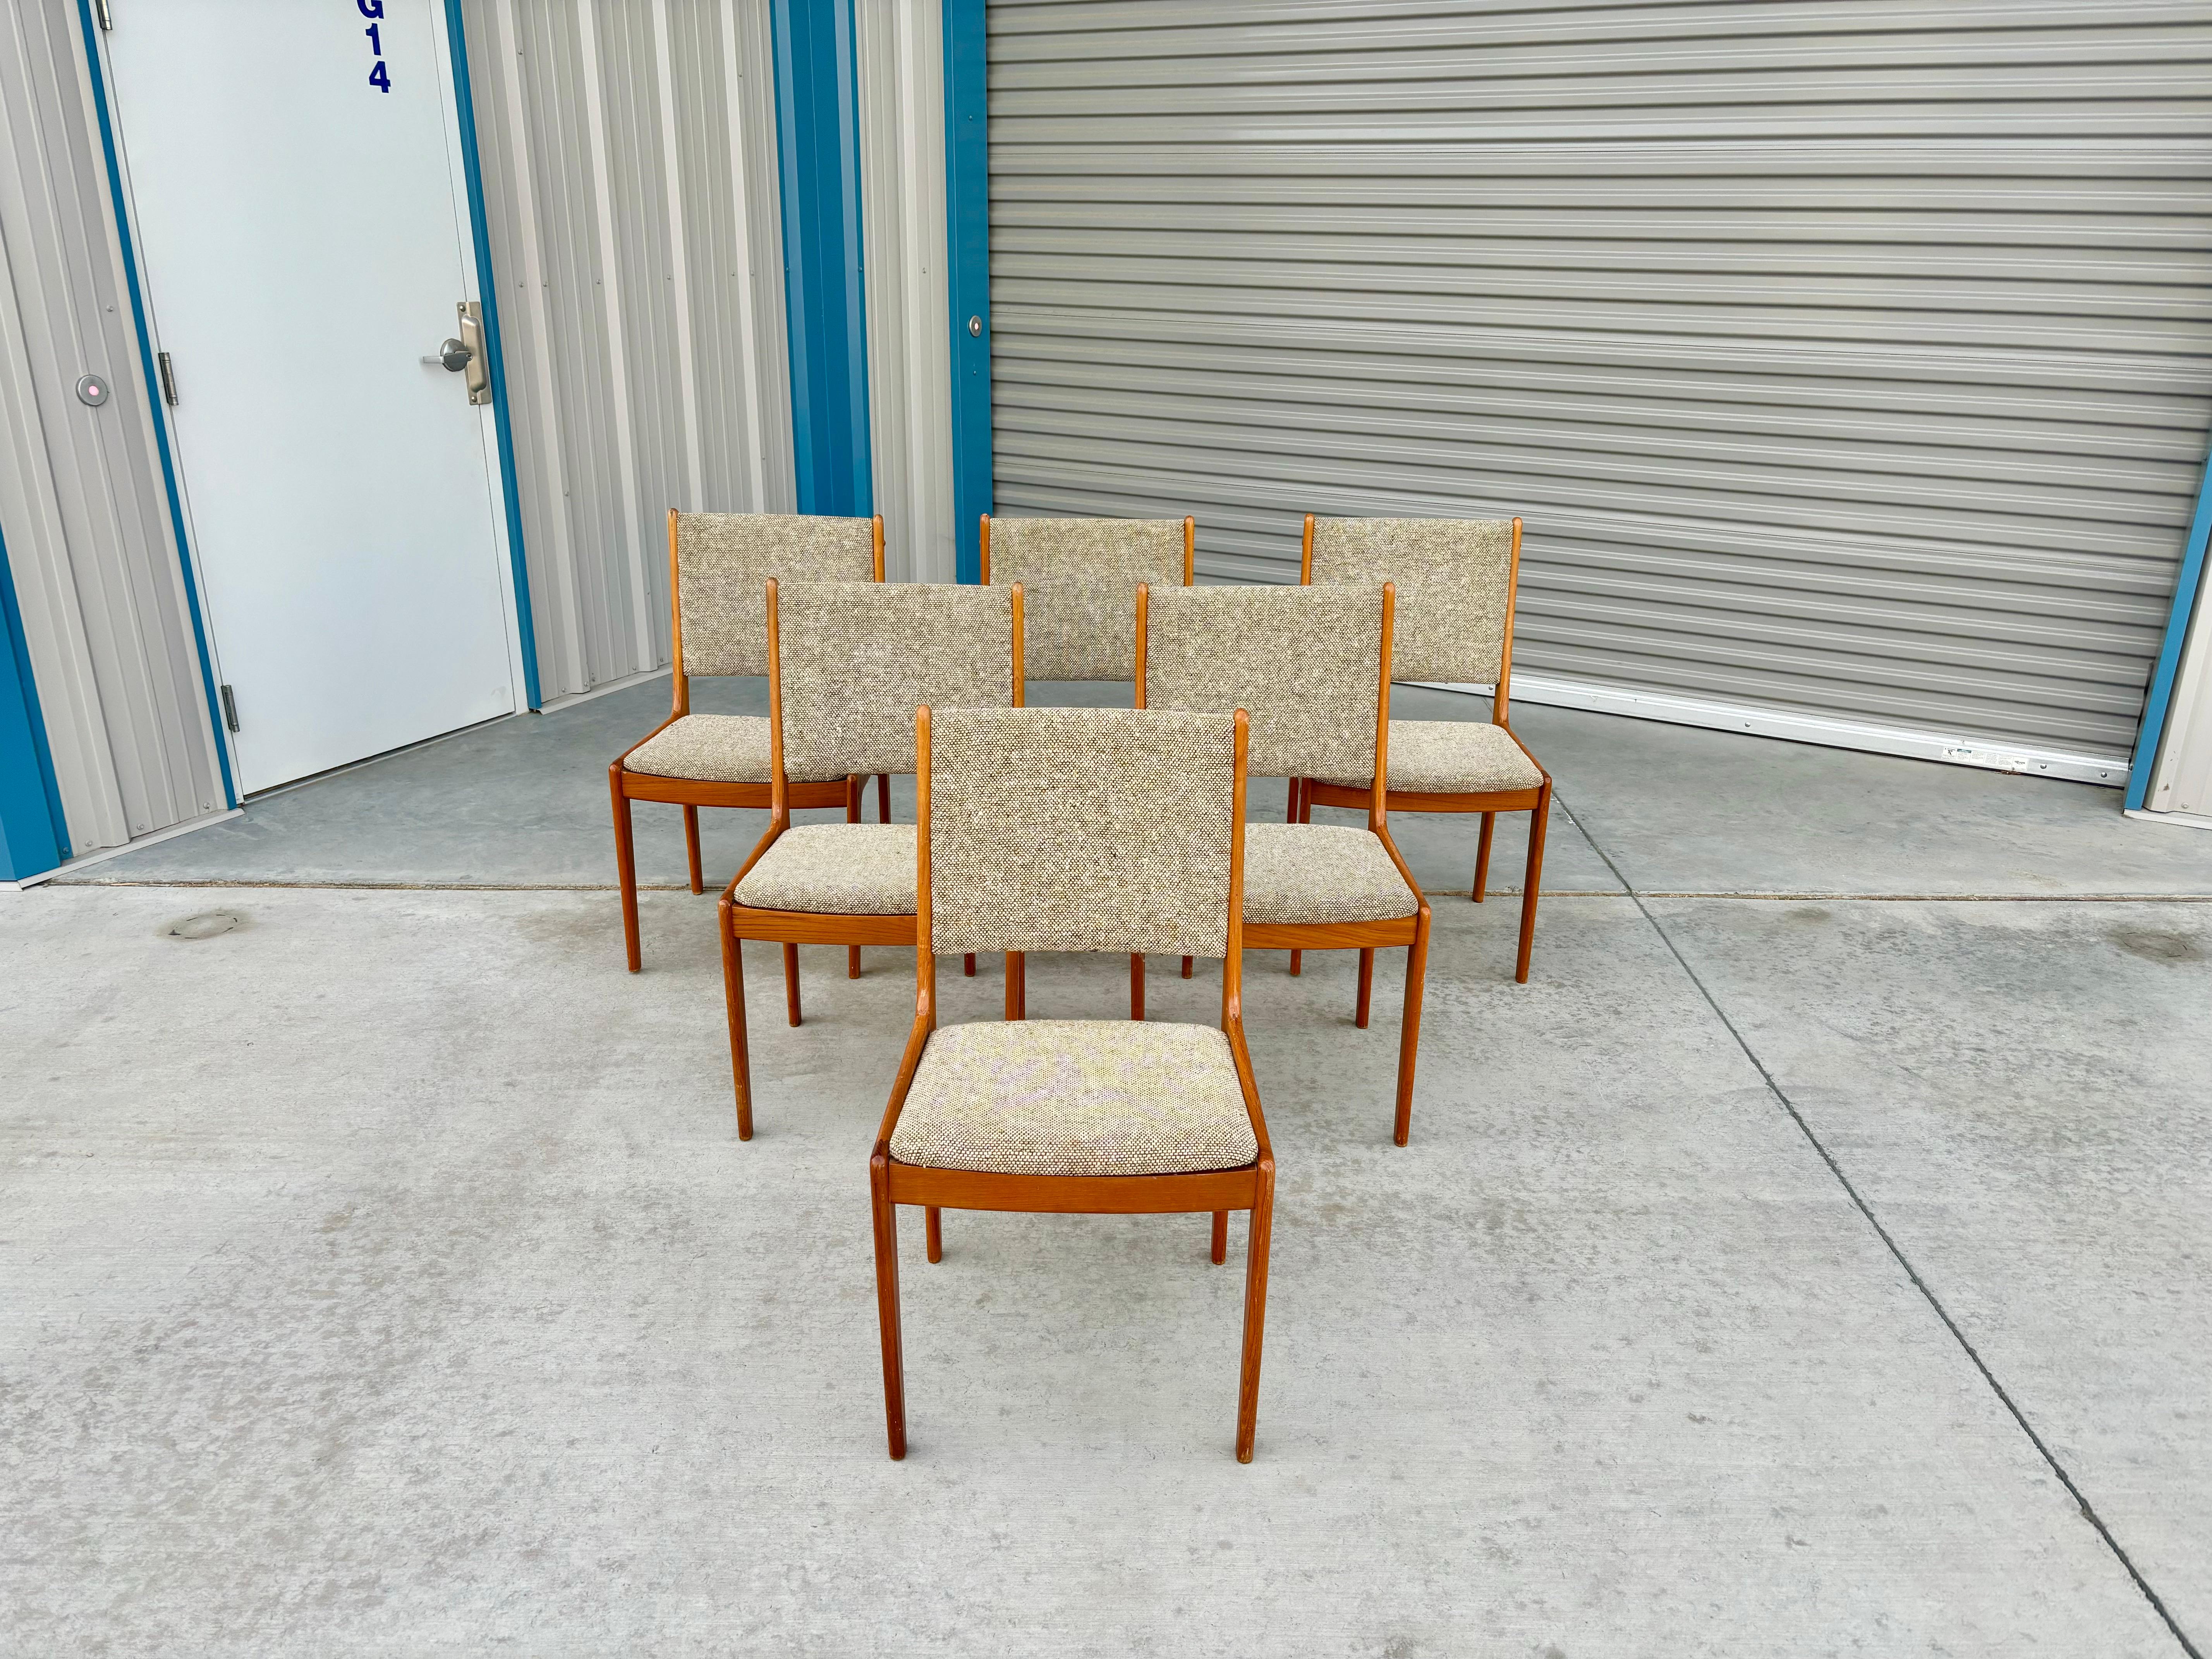 Danish modern teak dining chairs were designed and manufactured in Denmark circa the 1960s. The teak frame is not only sturdy but also adds a touch of warmth to the design, while the original upholstery provides both comfort and character. Whether